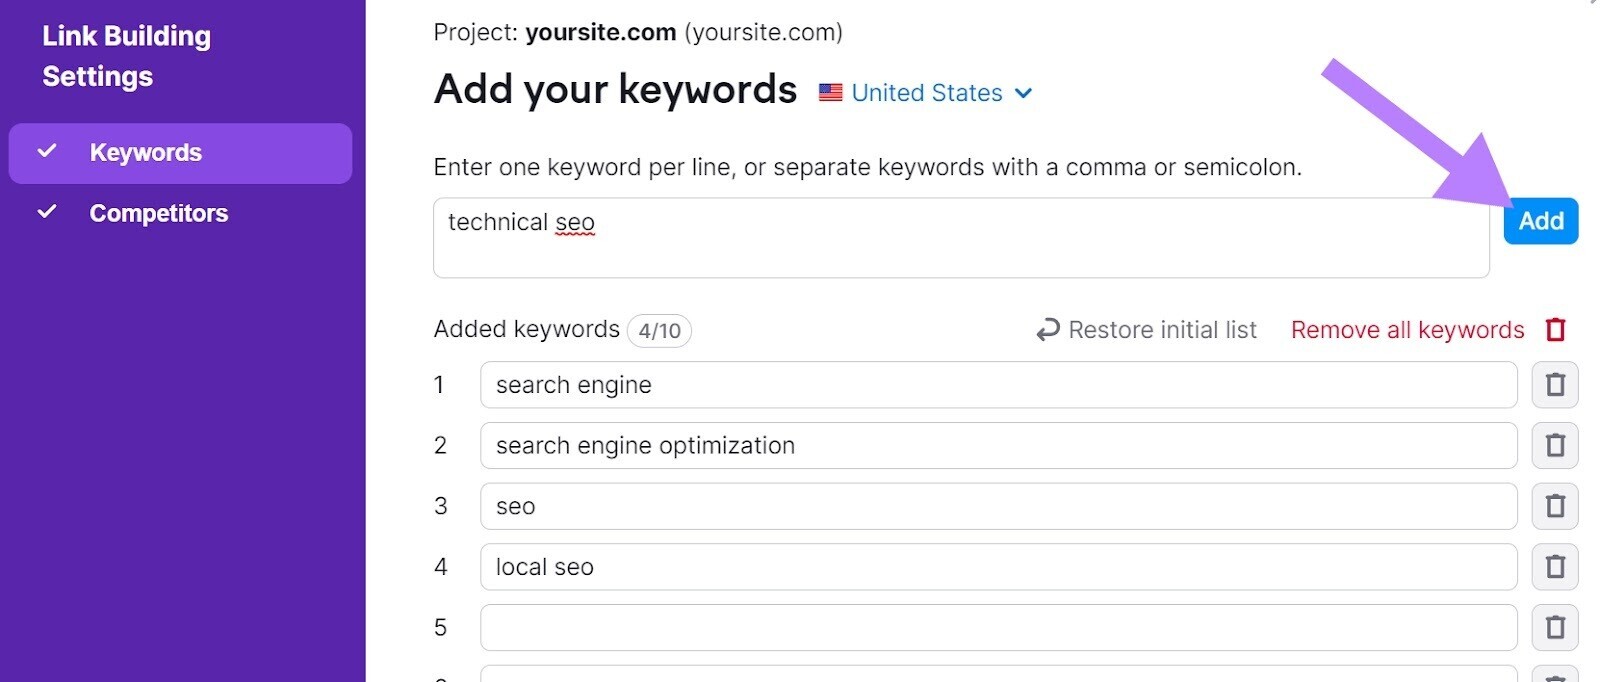 "Add your keywords" page